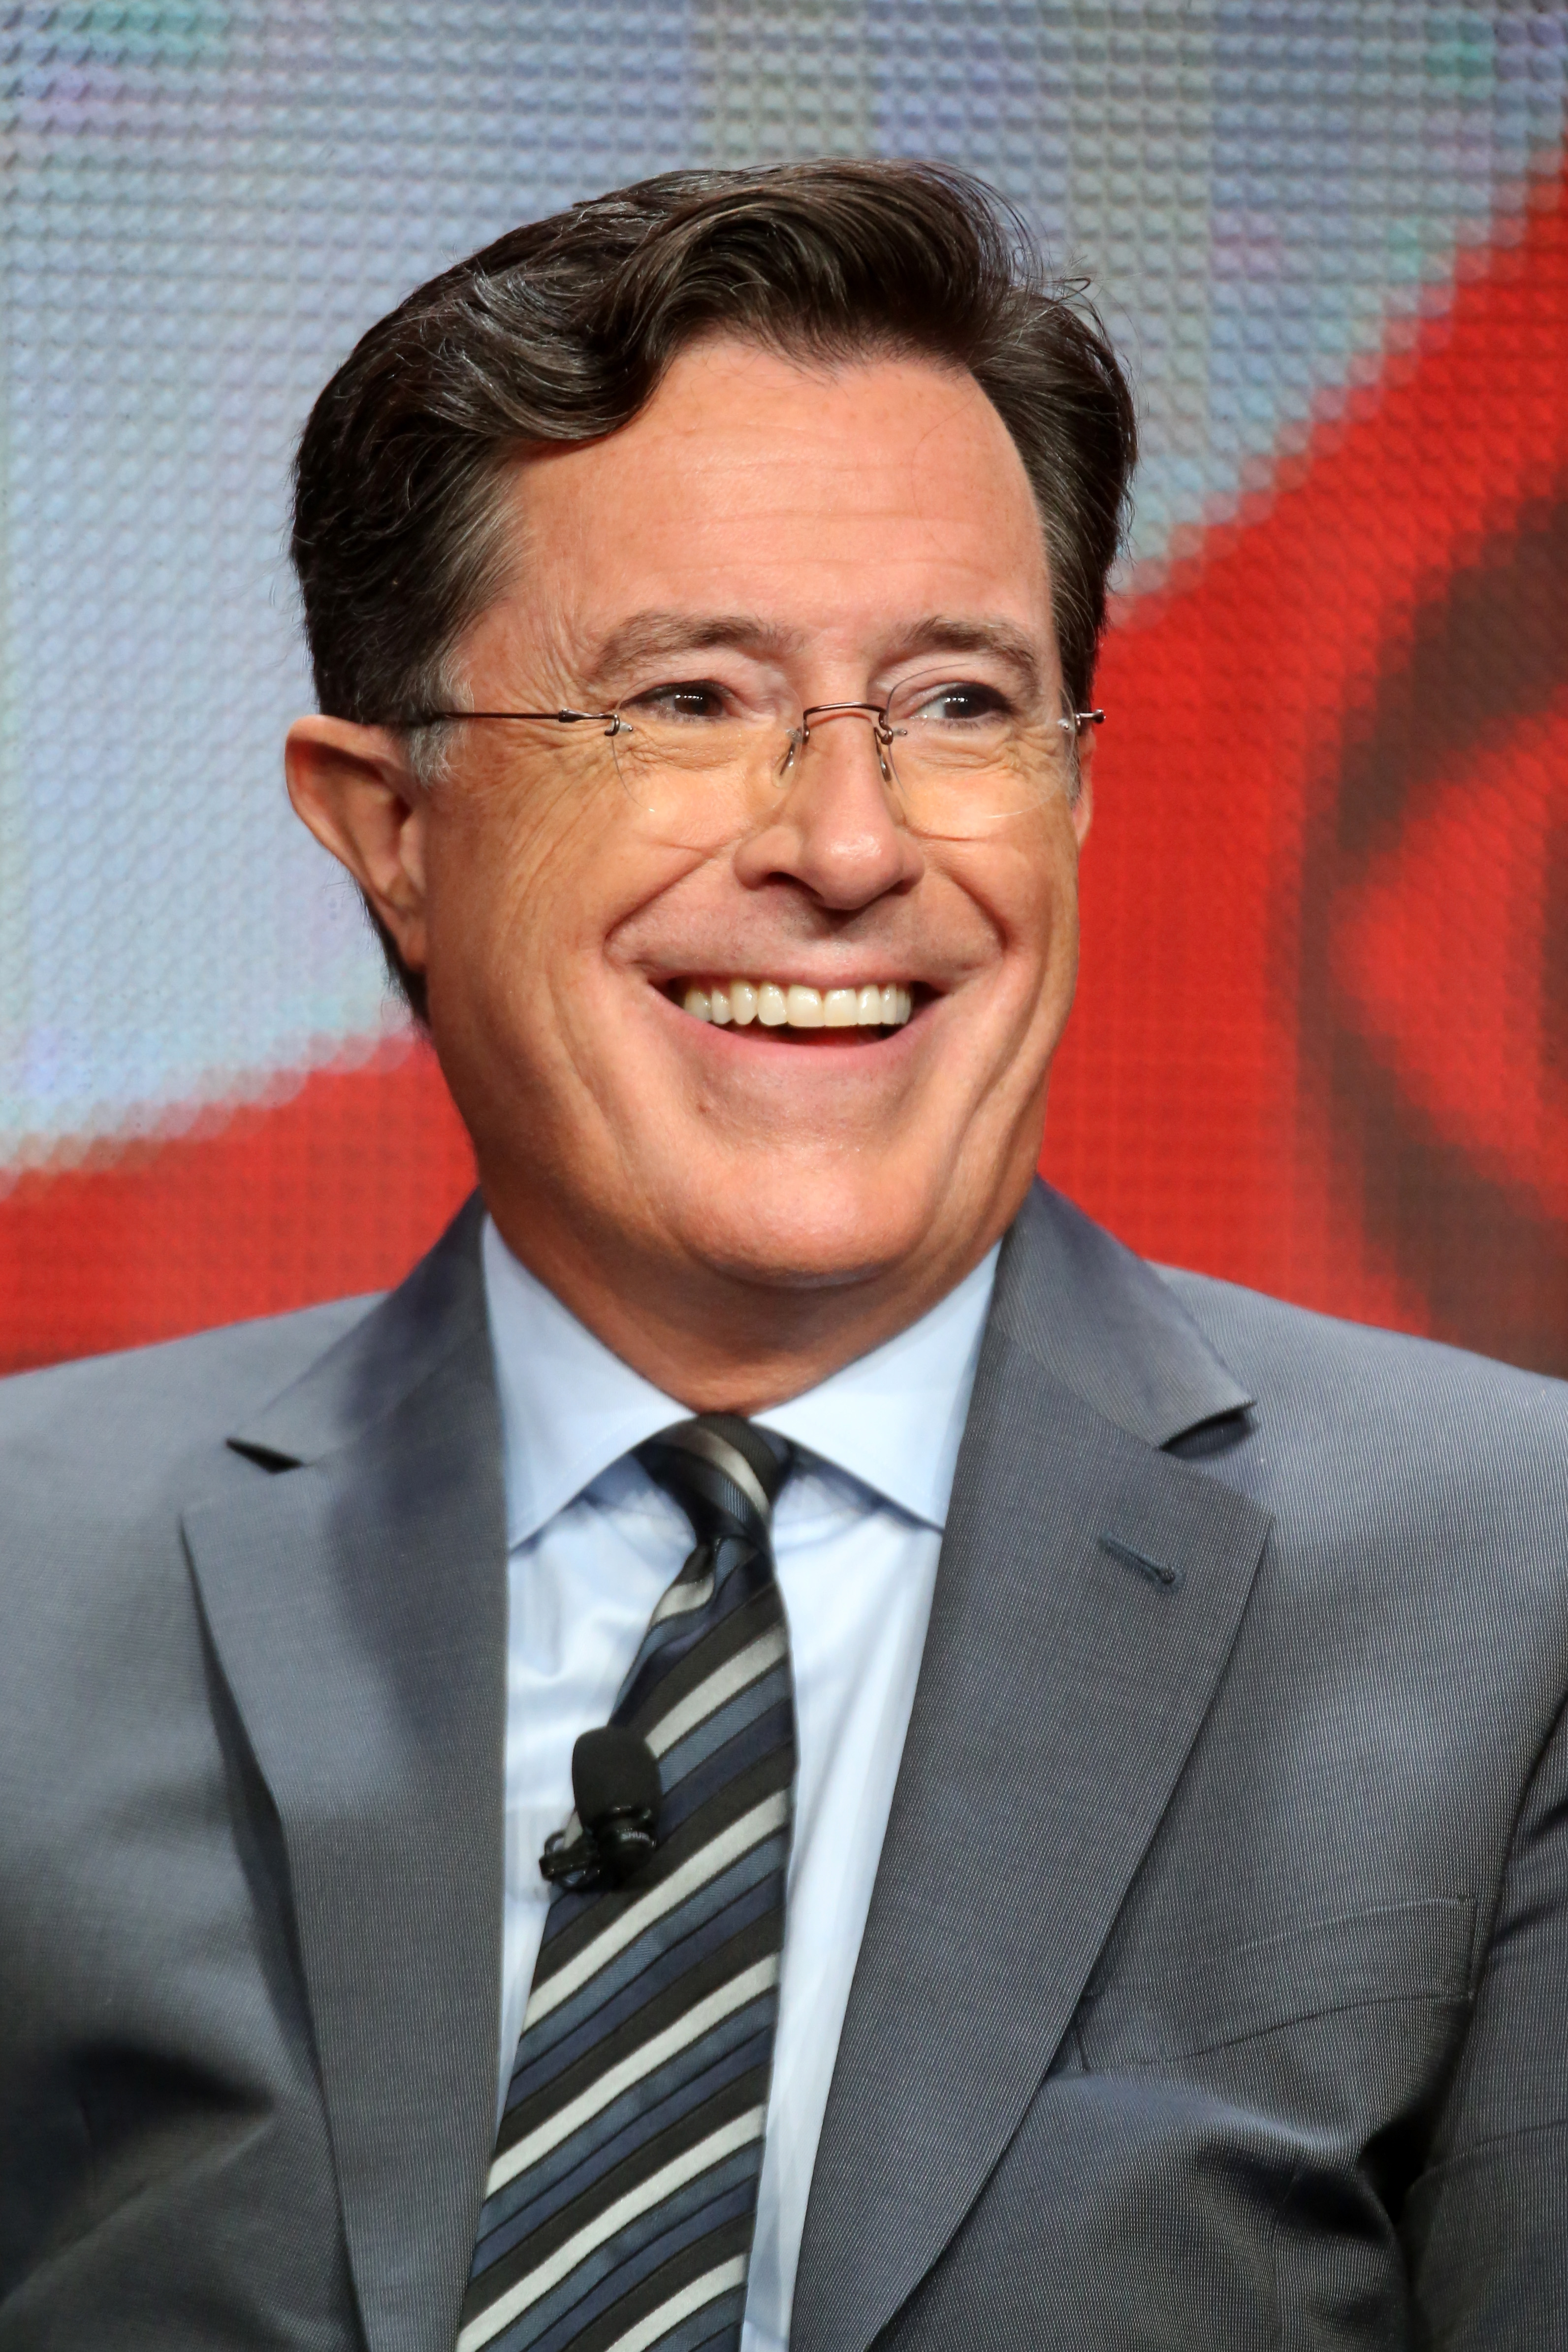 Stephen Colbert speaks onstage during the 'The Late Show with Stephen Colbert' panel discussion in Los Angeles on Aug. 10, 2015. (Frederick M. Brown—Getty Images)